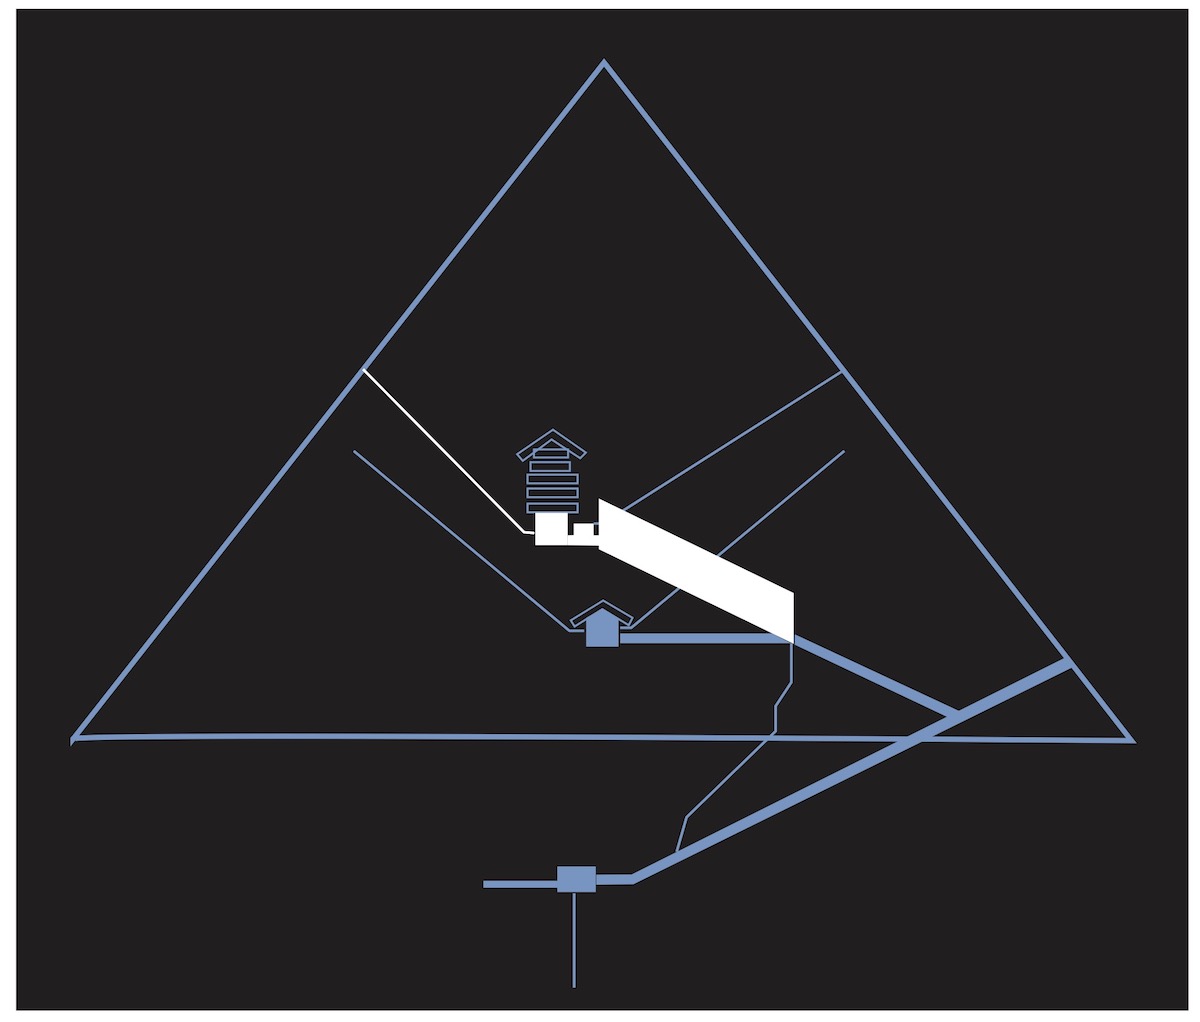 Diagram of the Great Pyramid